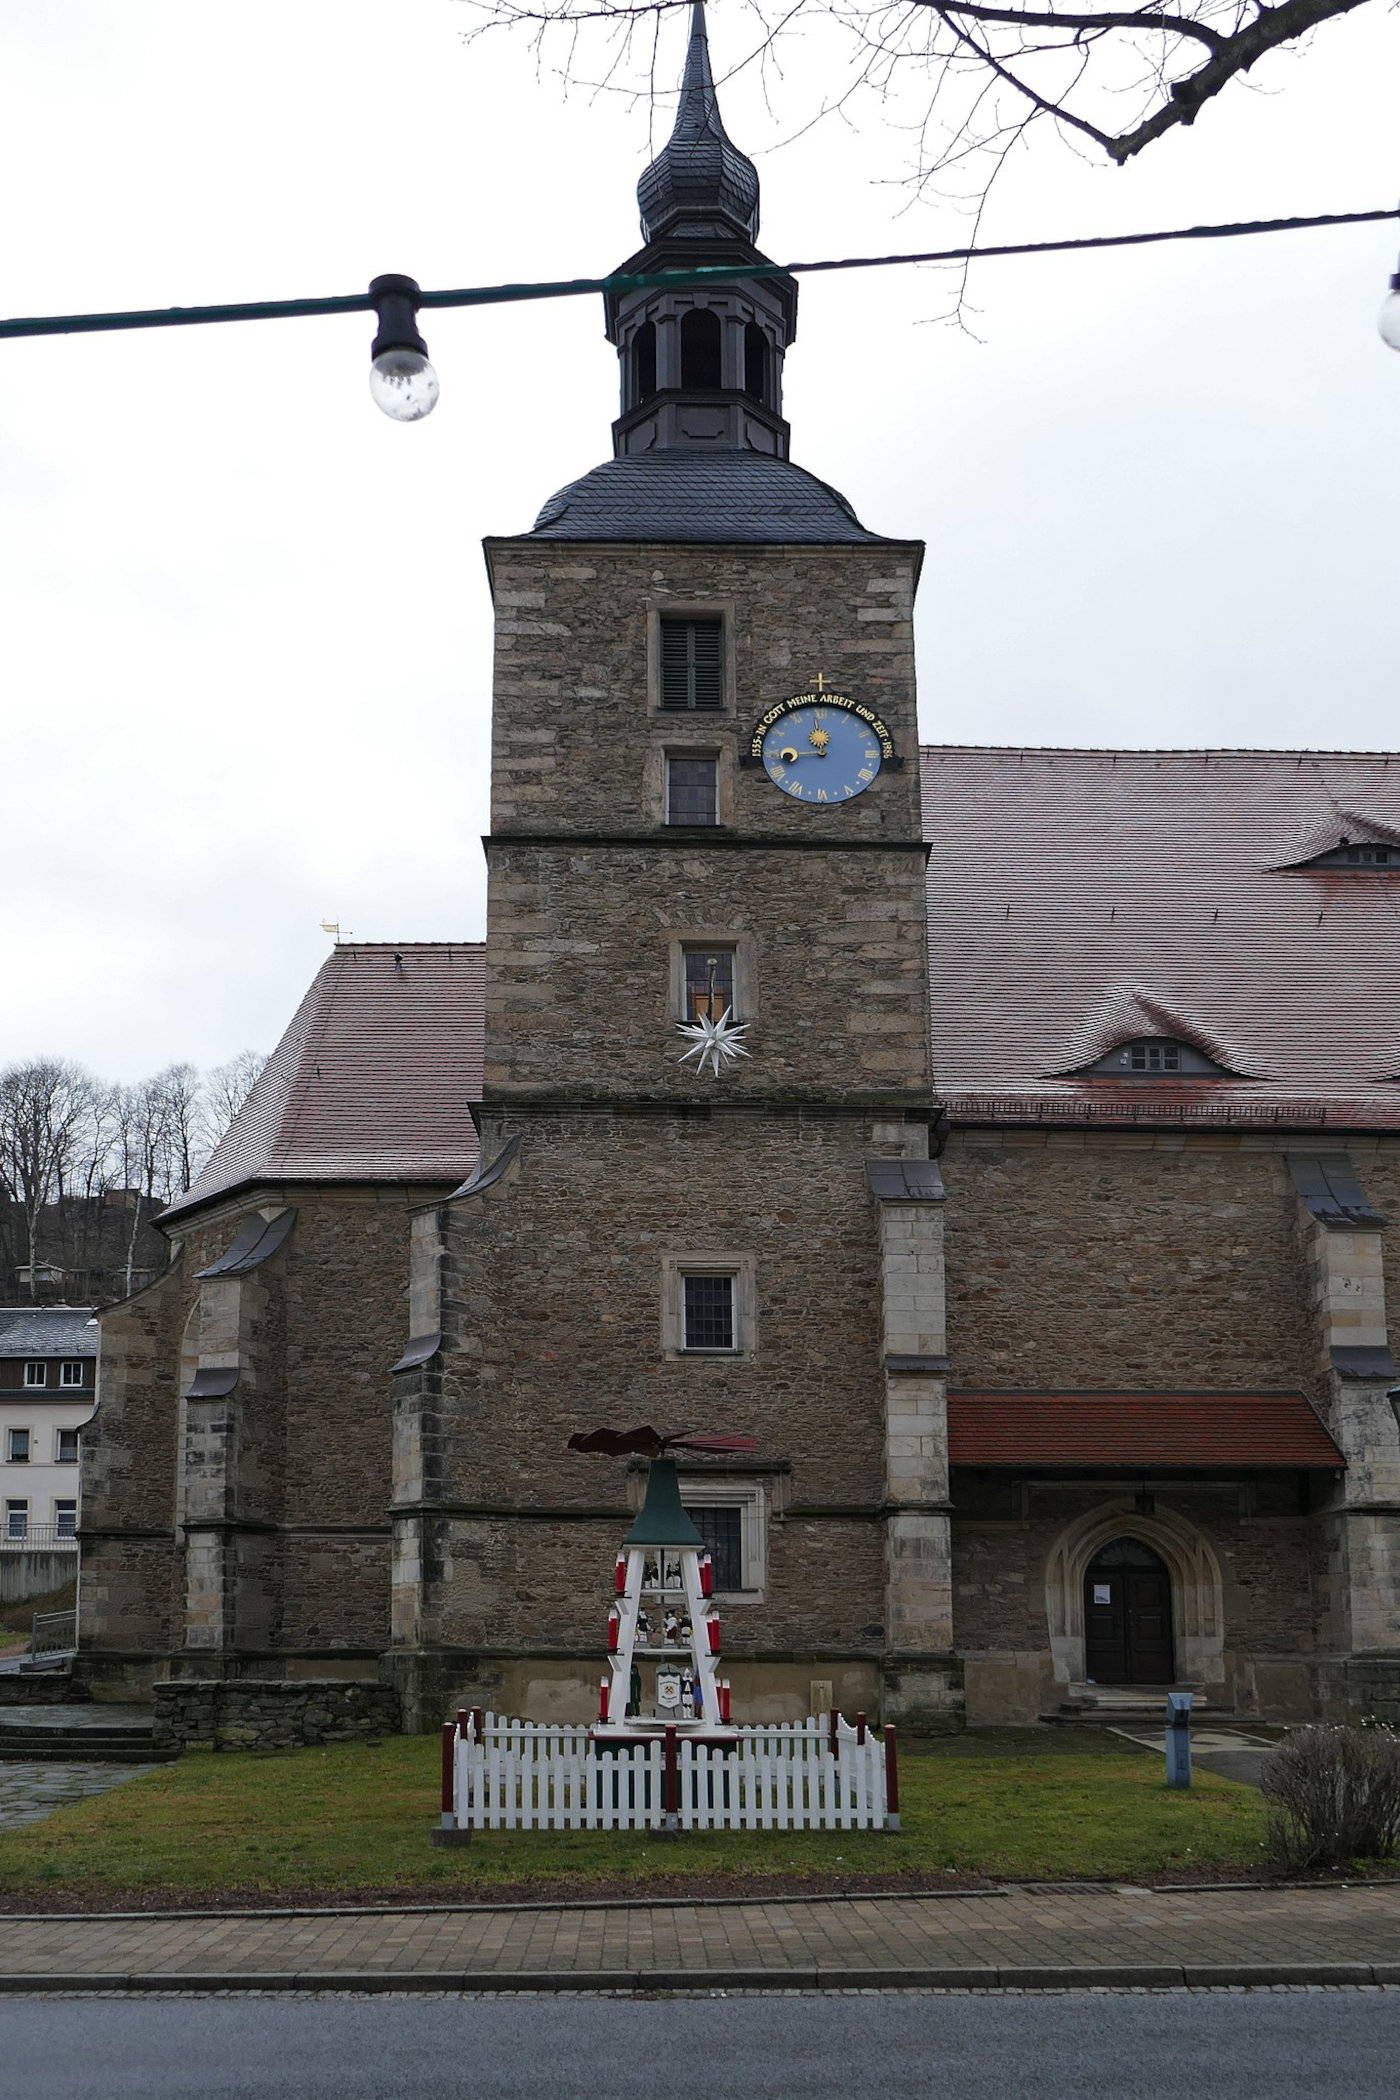 The tower clock of the St. Wolfgang evangelical church in Glashütte 2